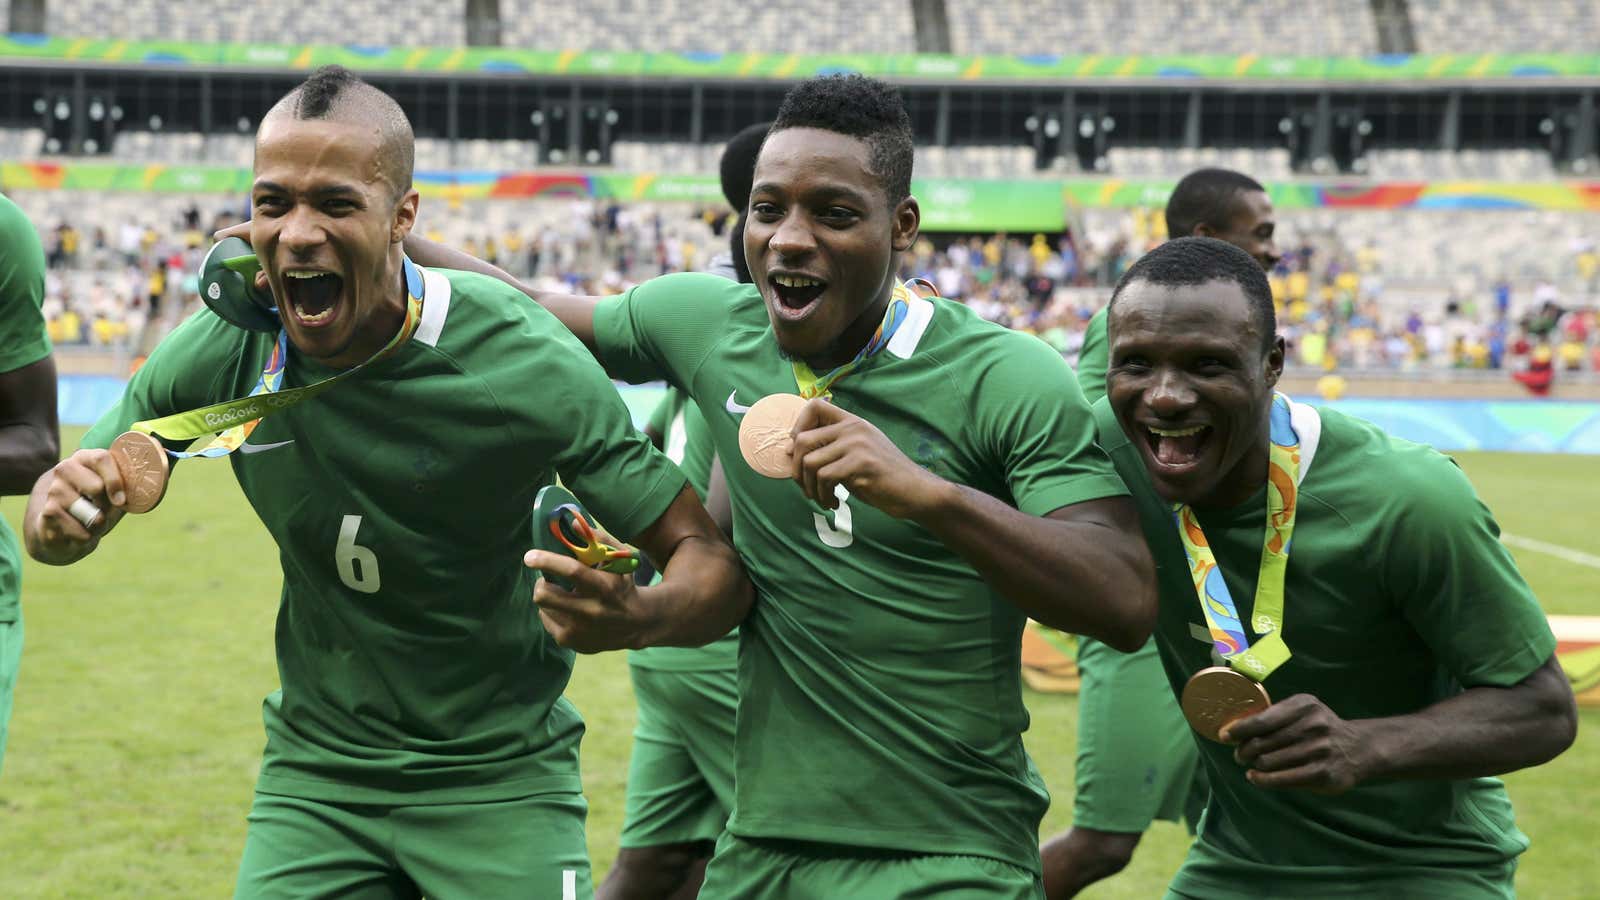 Christmas came early for Nigeria’s Olympics soccer team.